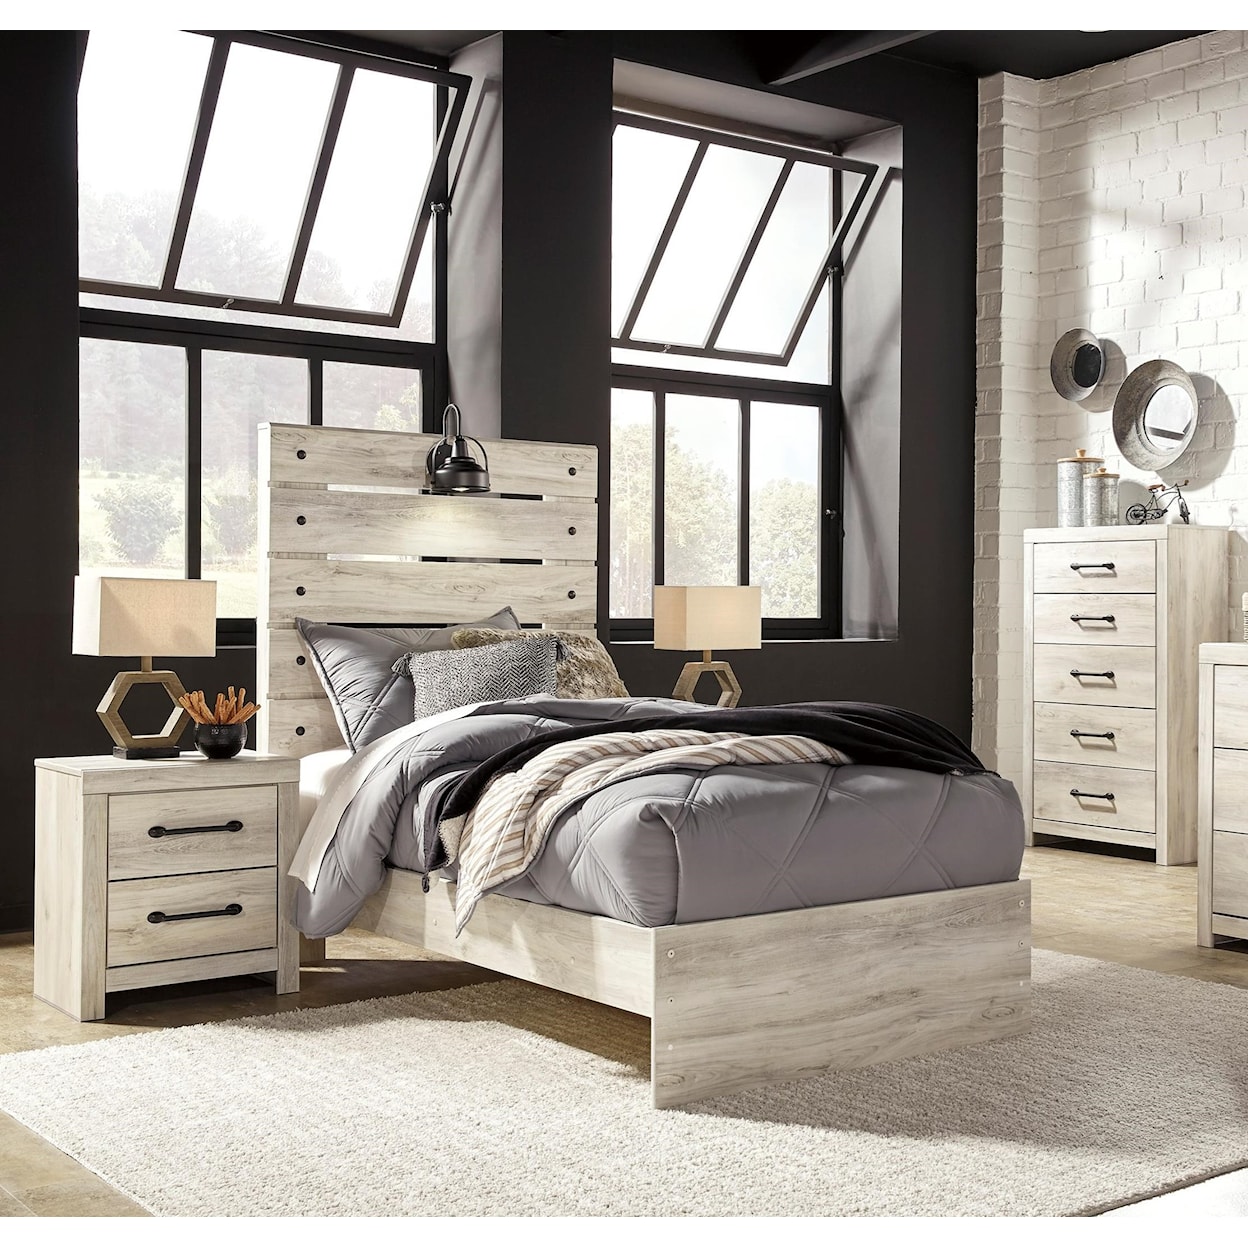 Ashley Furniture Signature Design Cambeck Twin Bedroom Group